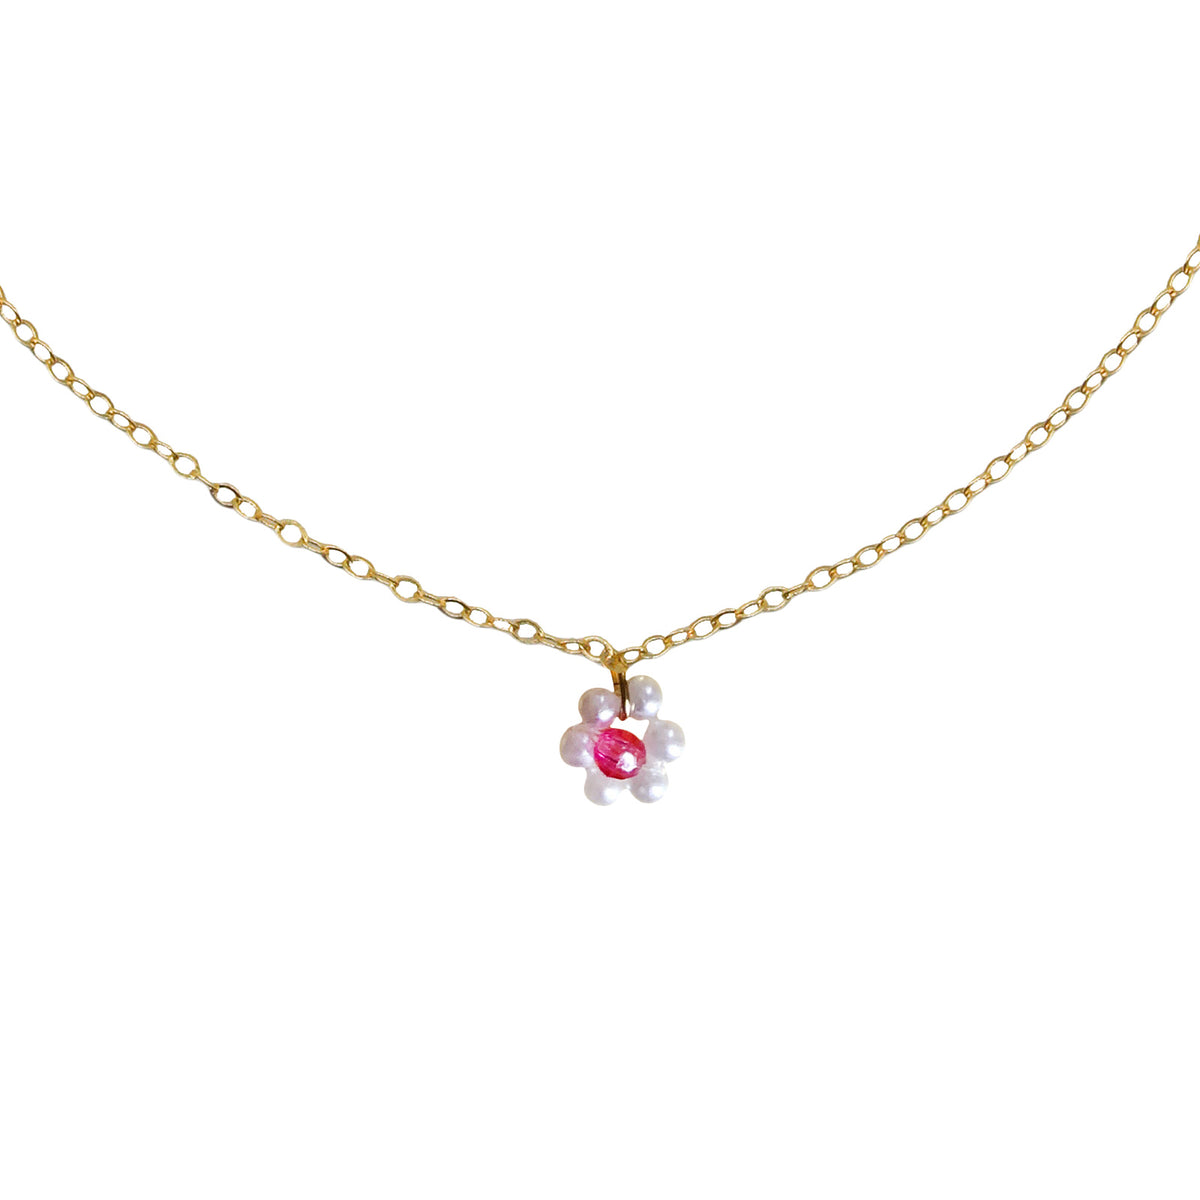 Close-up of the flower pendant on the Mini Gigi Uno Necklace.